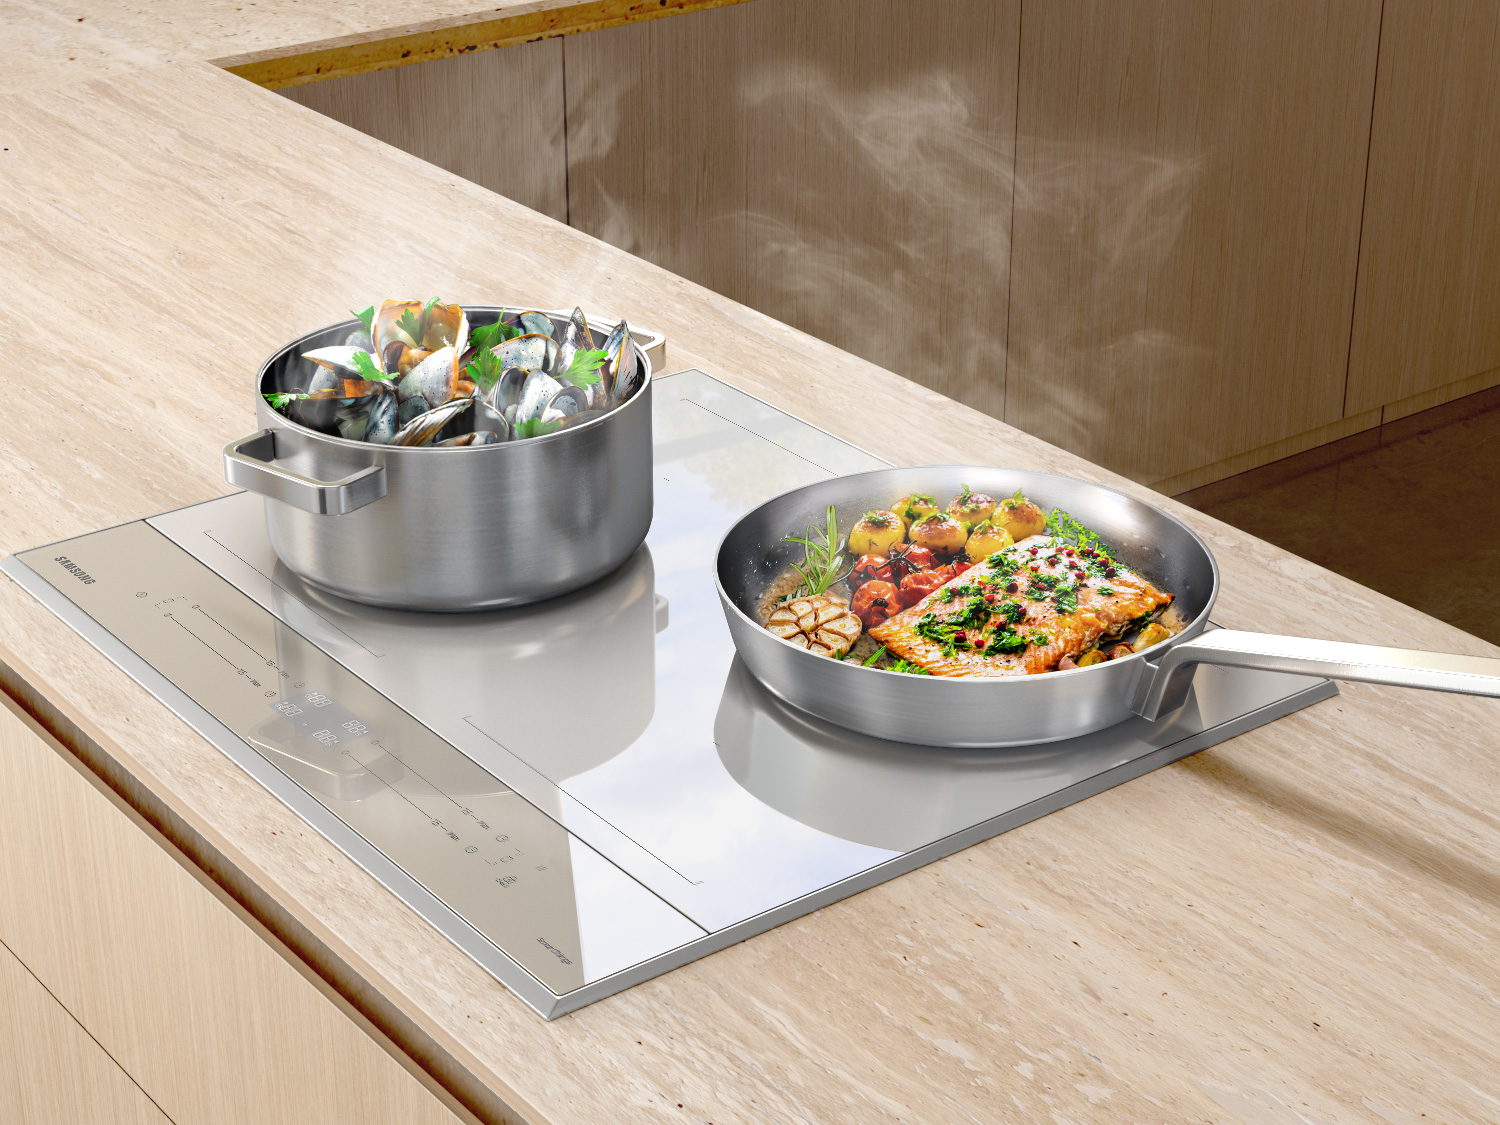 Bespoke Induction Hob offers precision heating and cooking options for homeowners seeking convenience.